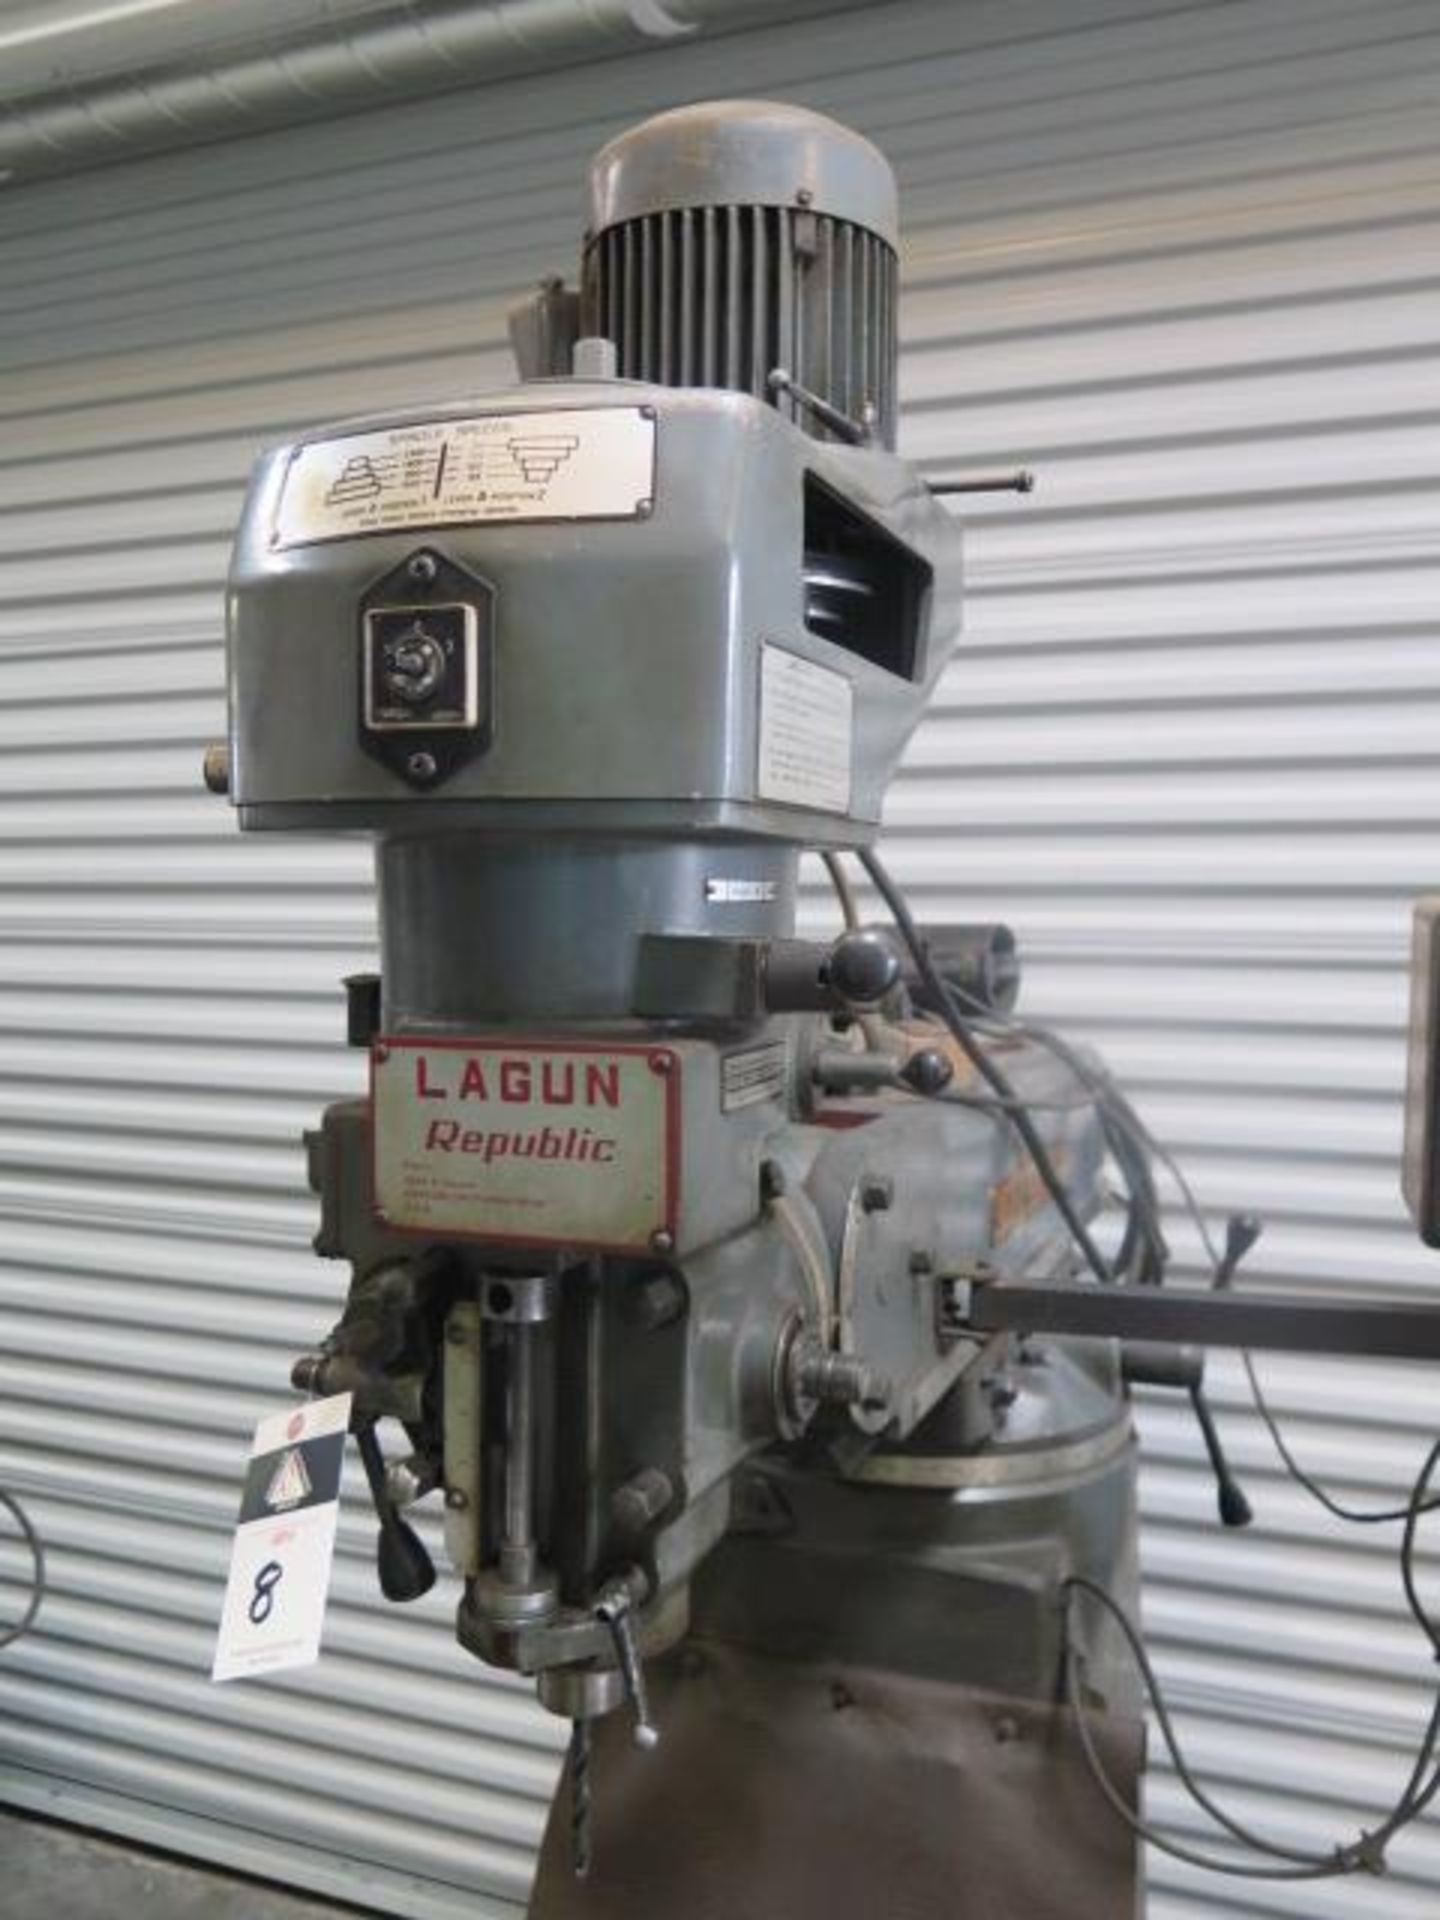 Lagun FT-1 Vertical Mill w/ Anilam Wizard DRO, 55-2940 RPM, 8-Speeds, 9” x 42” Table SOLD AS-IS - Image 4 of 9